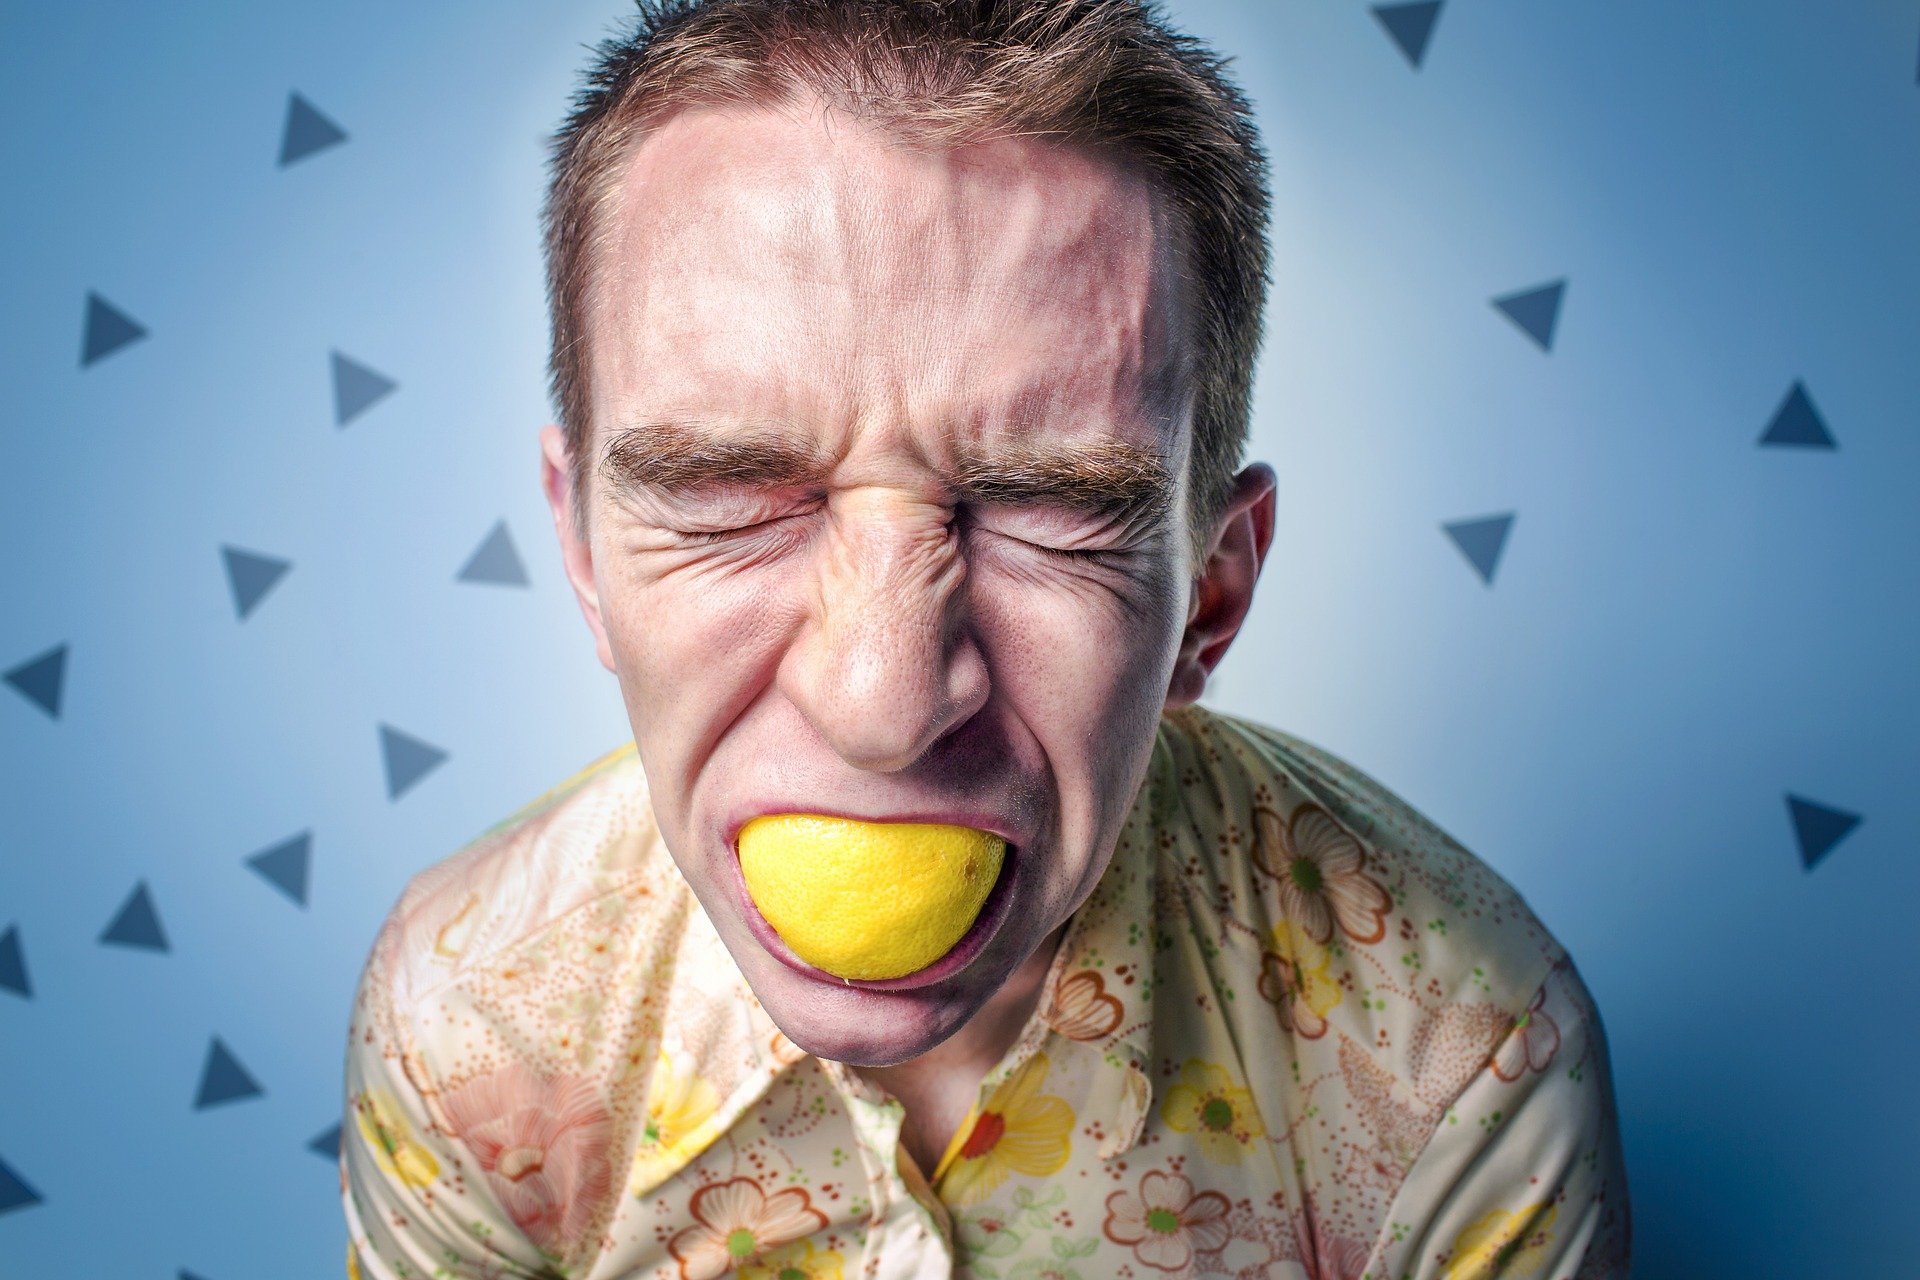 A man makes a face. He's just biting into a lemon.